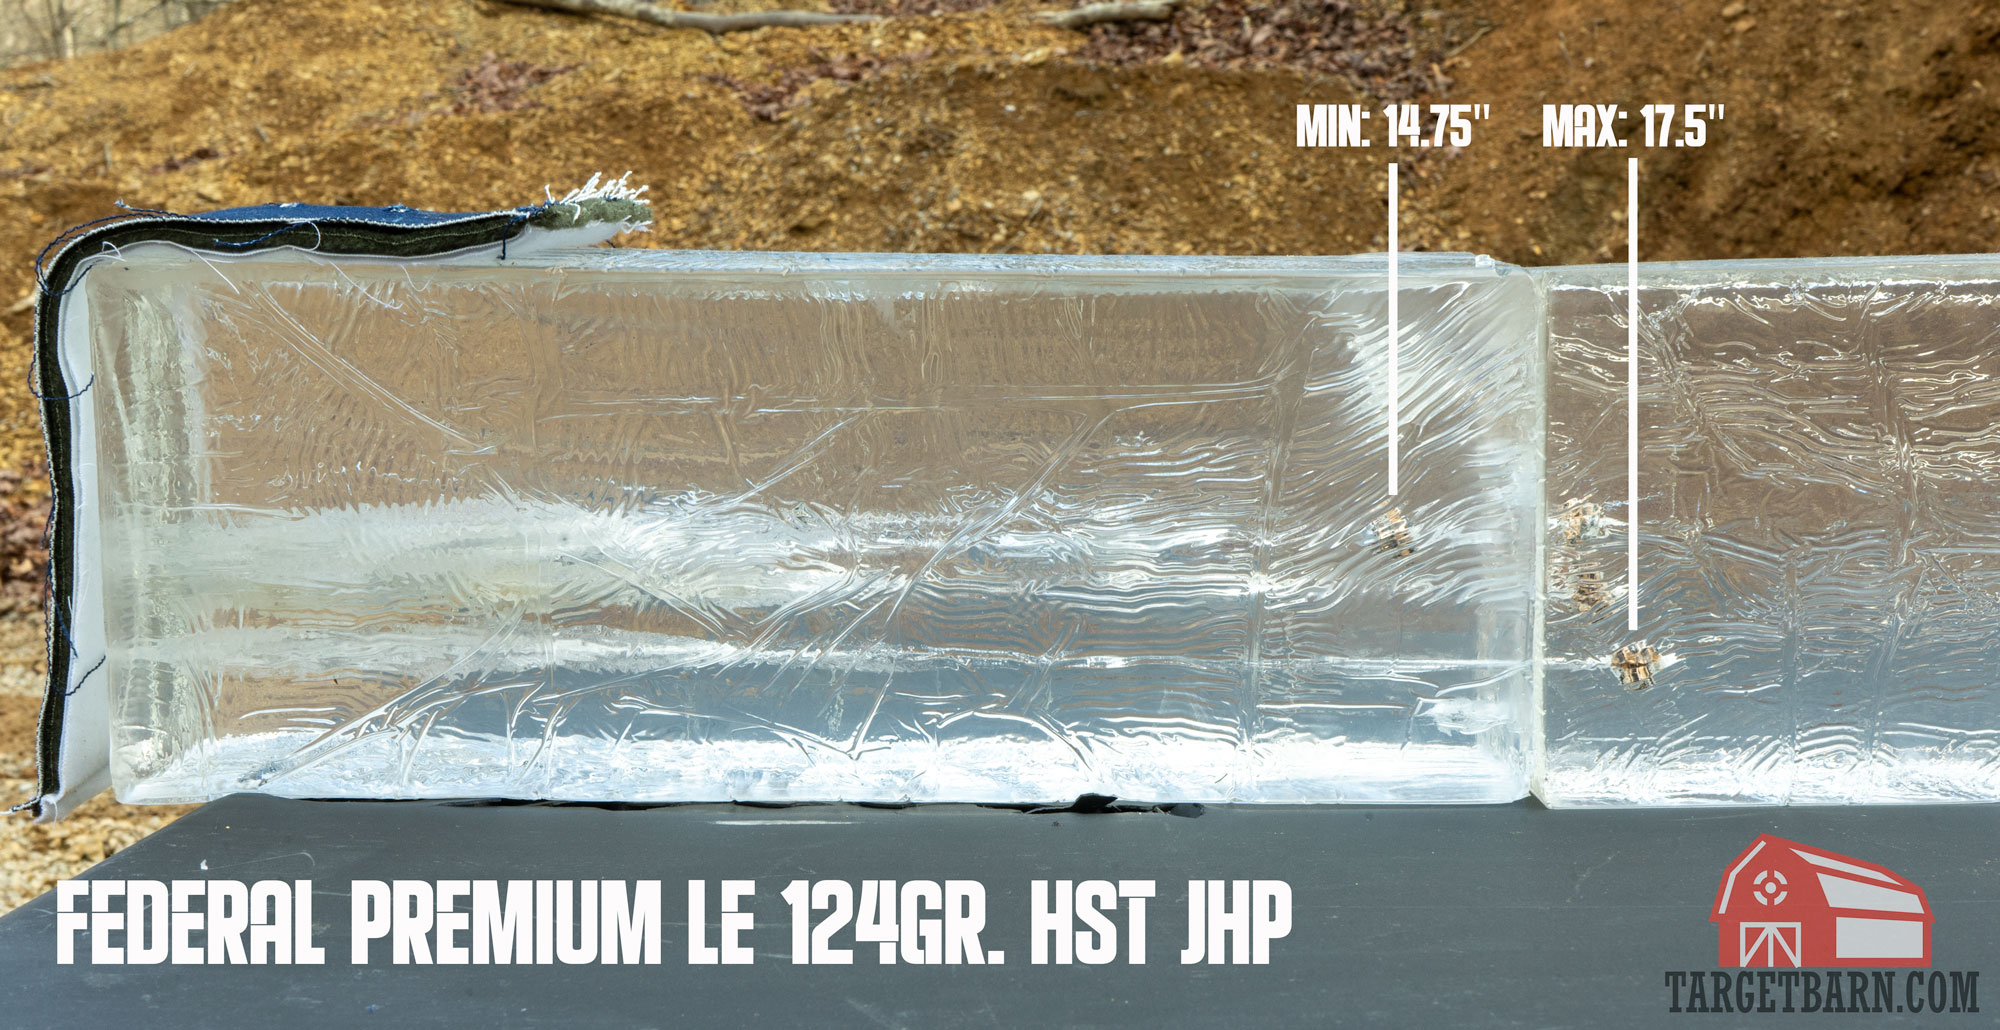 a ballistic gel block after 5 rounds of federal le 124gr. hst jhp with the minimum and maximum penetration marked